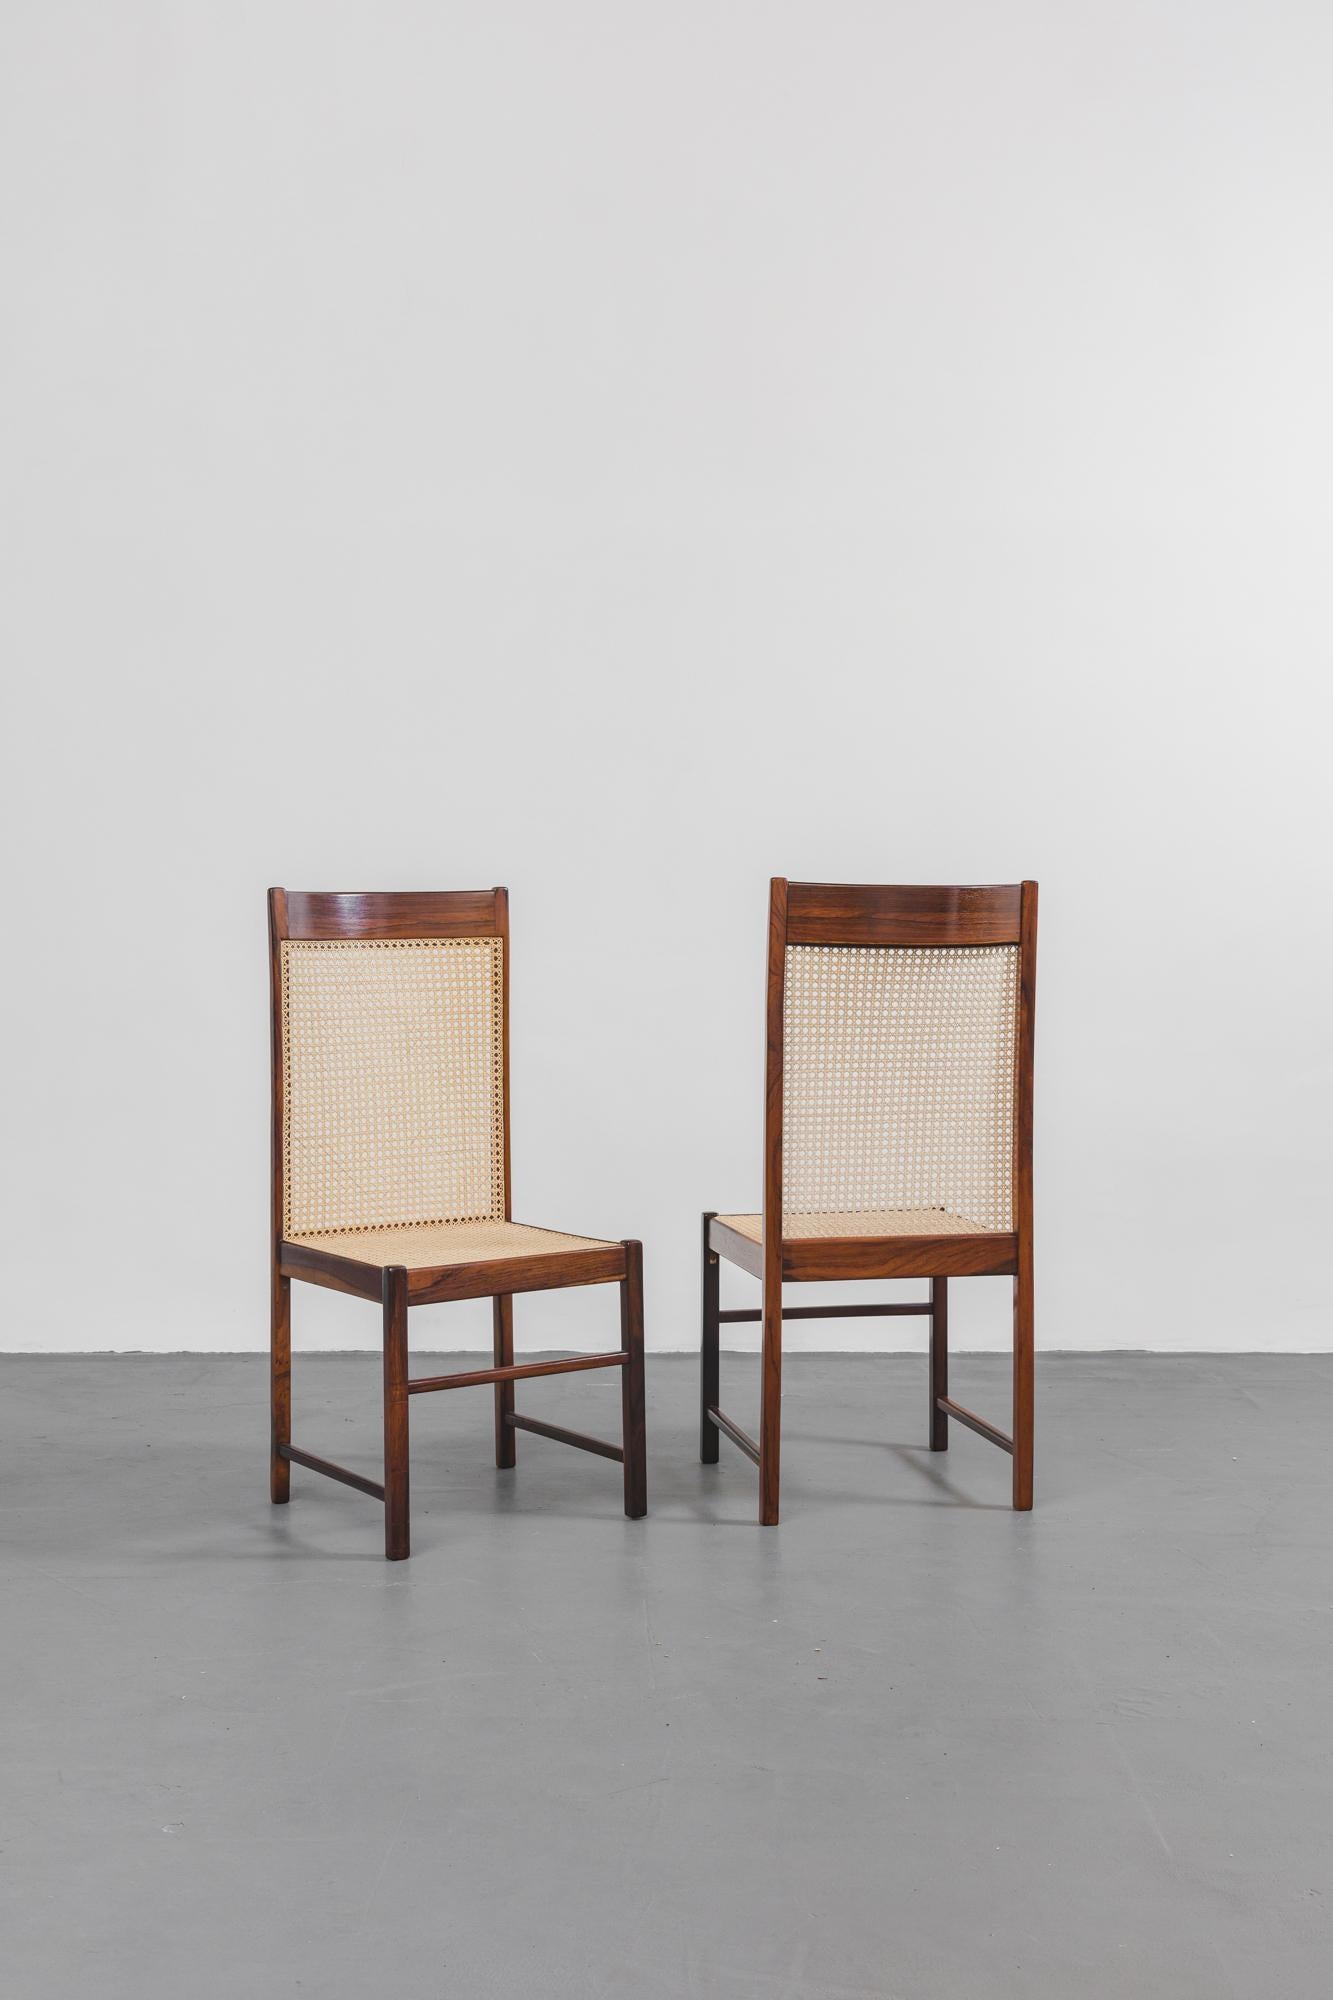 Designed by FAI, modern Brazilian chairs made of Rosewood, with nubby fabric. 
Made in Brazil, in the 1960s. 

Chairs made in solid Brazilian Rosewood (Jacaranda) with caned seats and backs. 

”Fatima Arquitetura Interiors,” known as ”FAI”, was